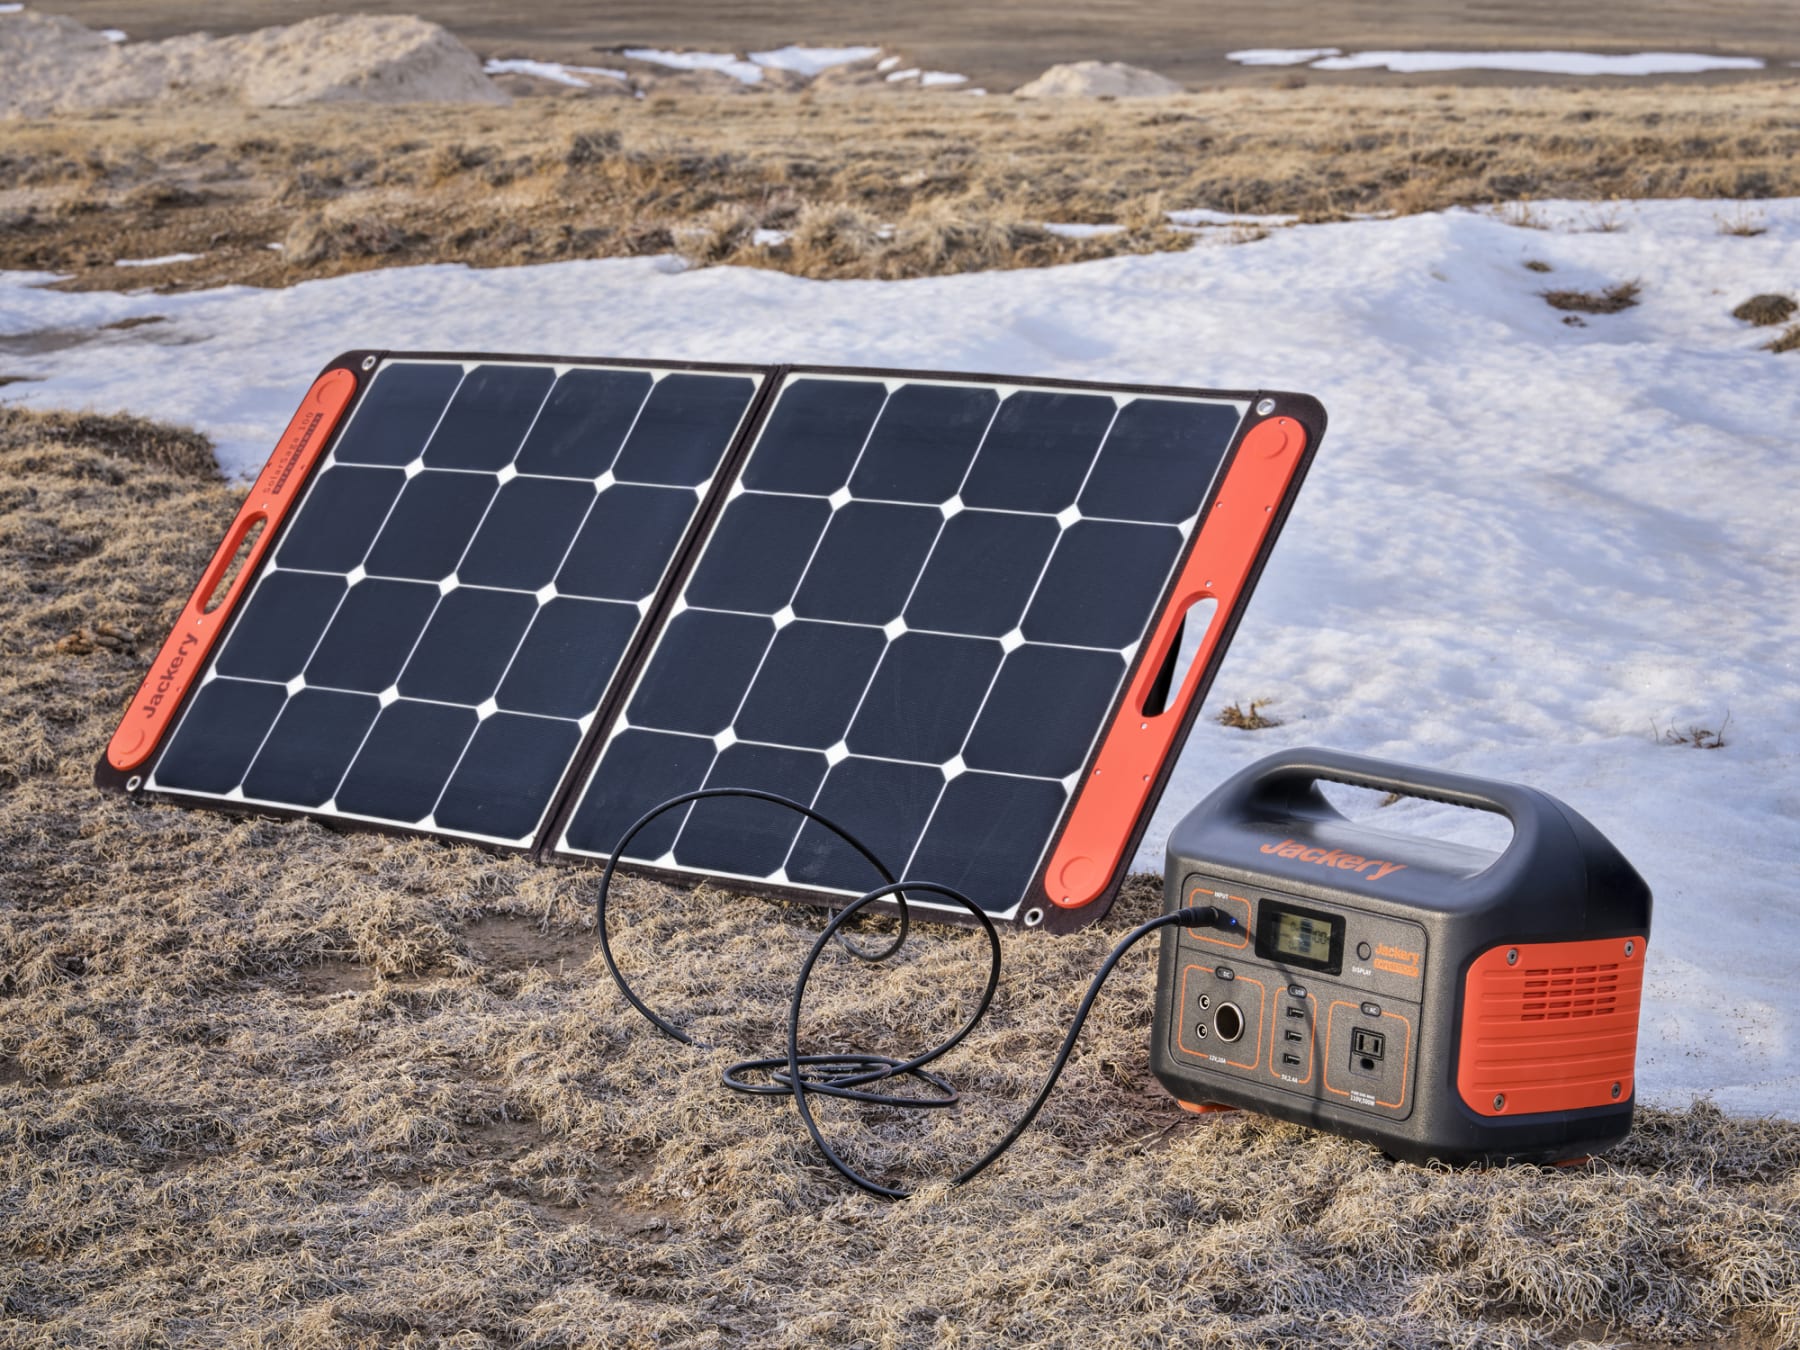 A portable power station and attached solar panel sit in an open field.